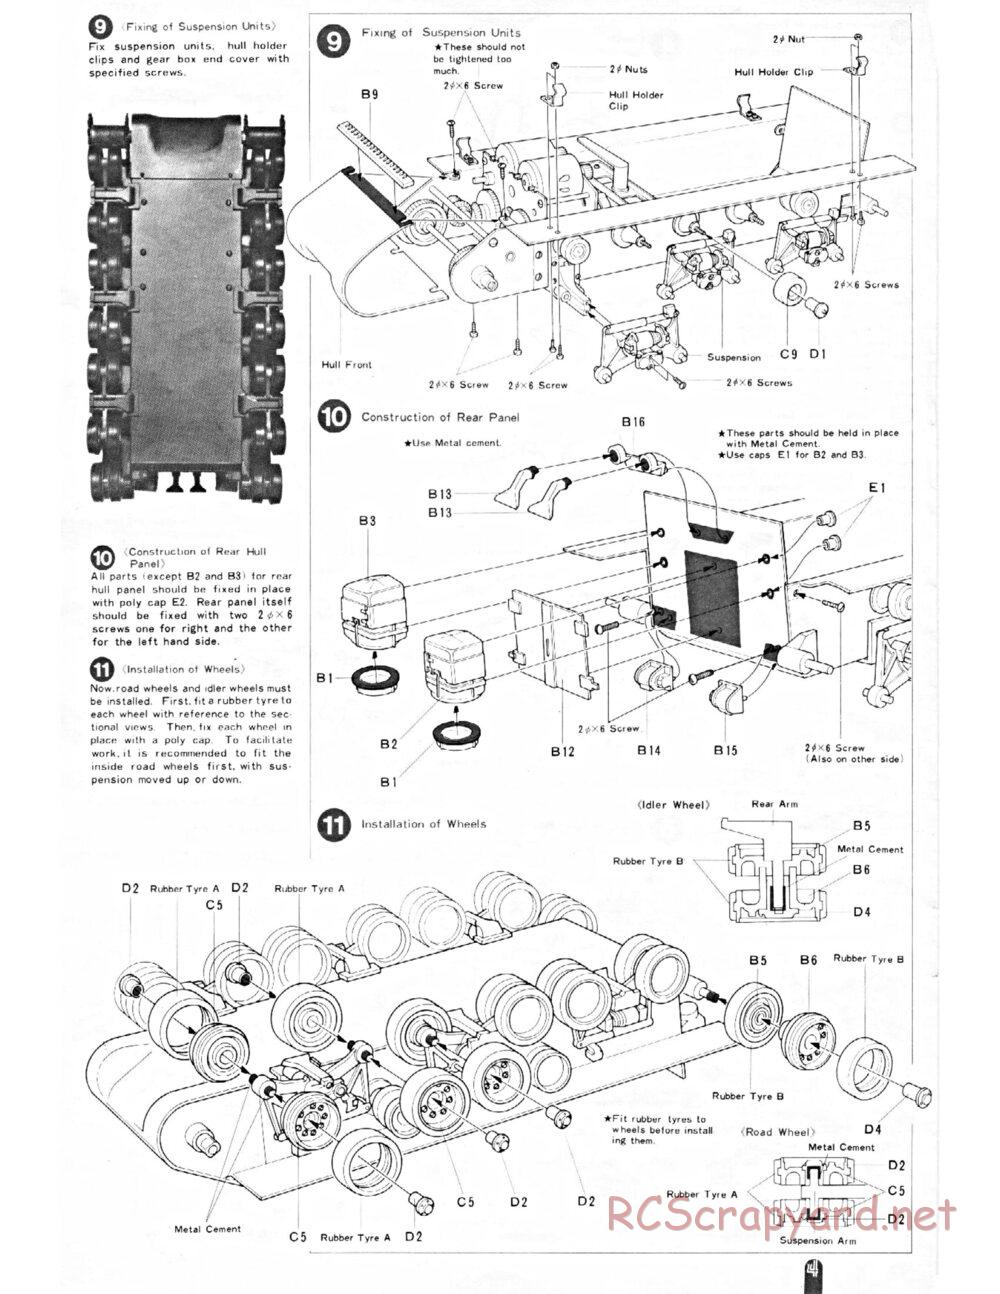 Tamiya - M4 Sherman 105mm Howitzer - 1/16 Scale Chassis - Manual - Page 4